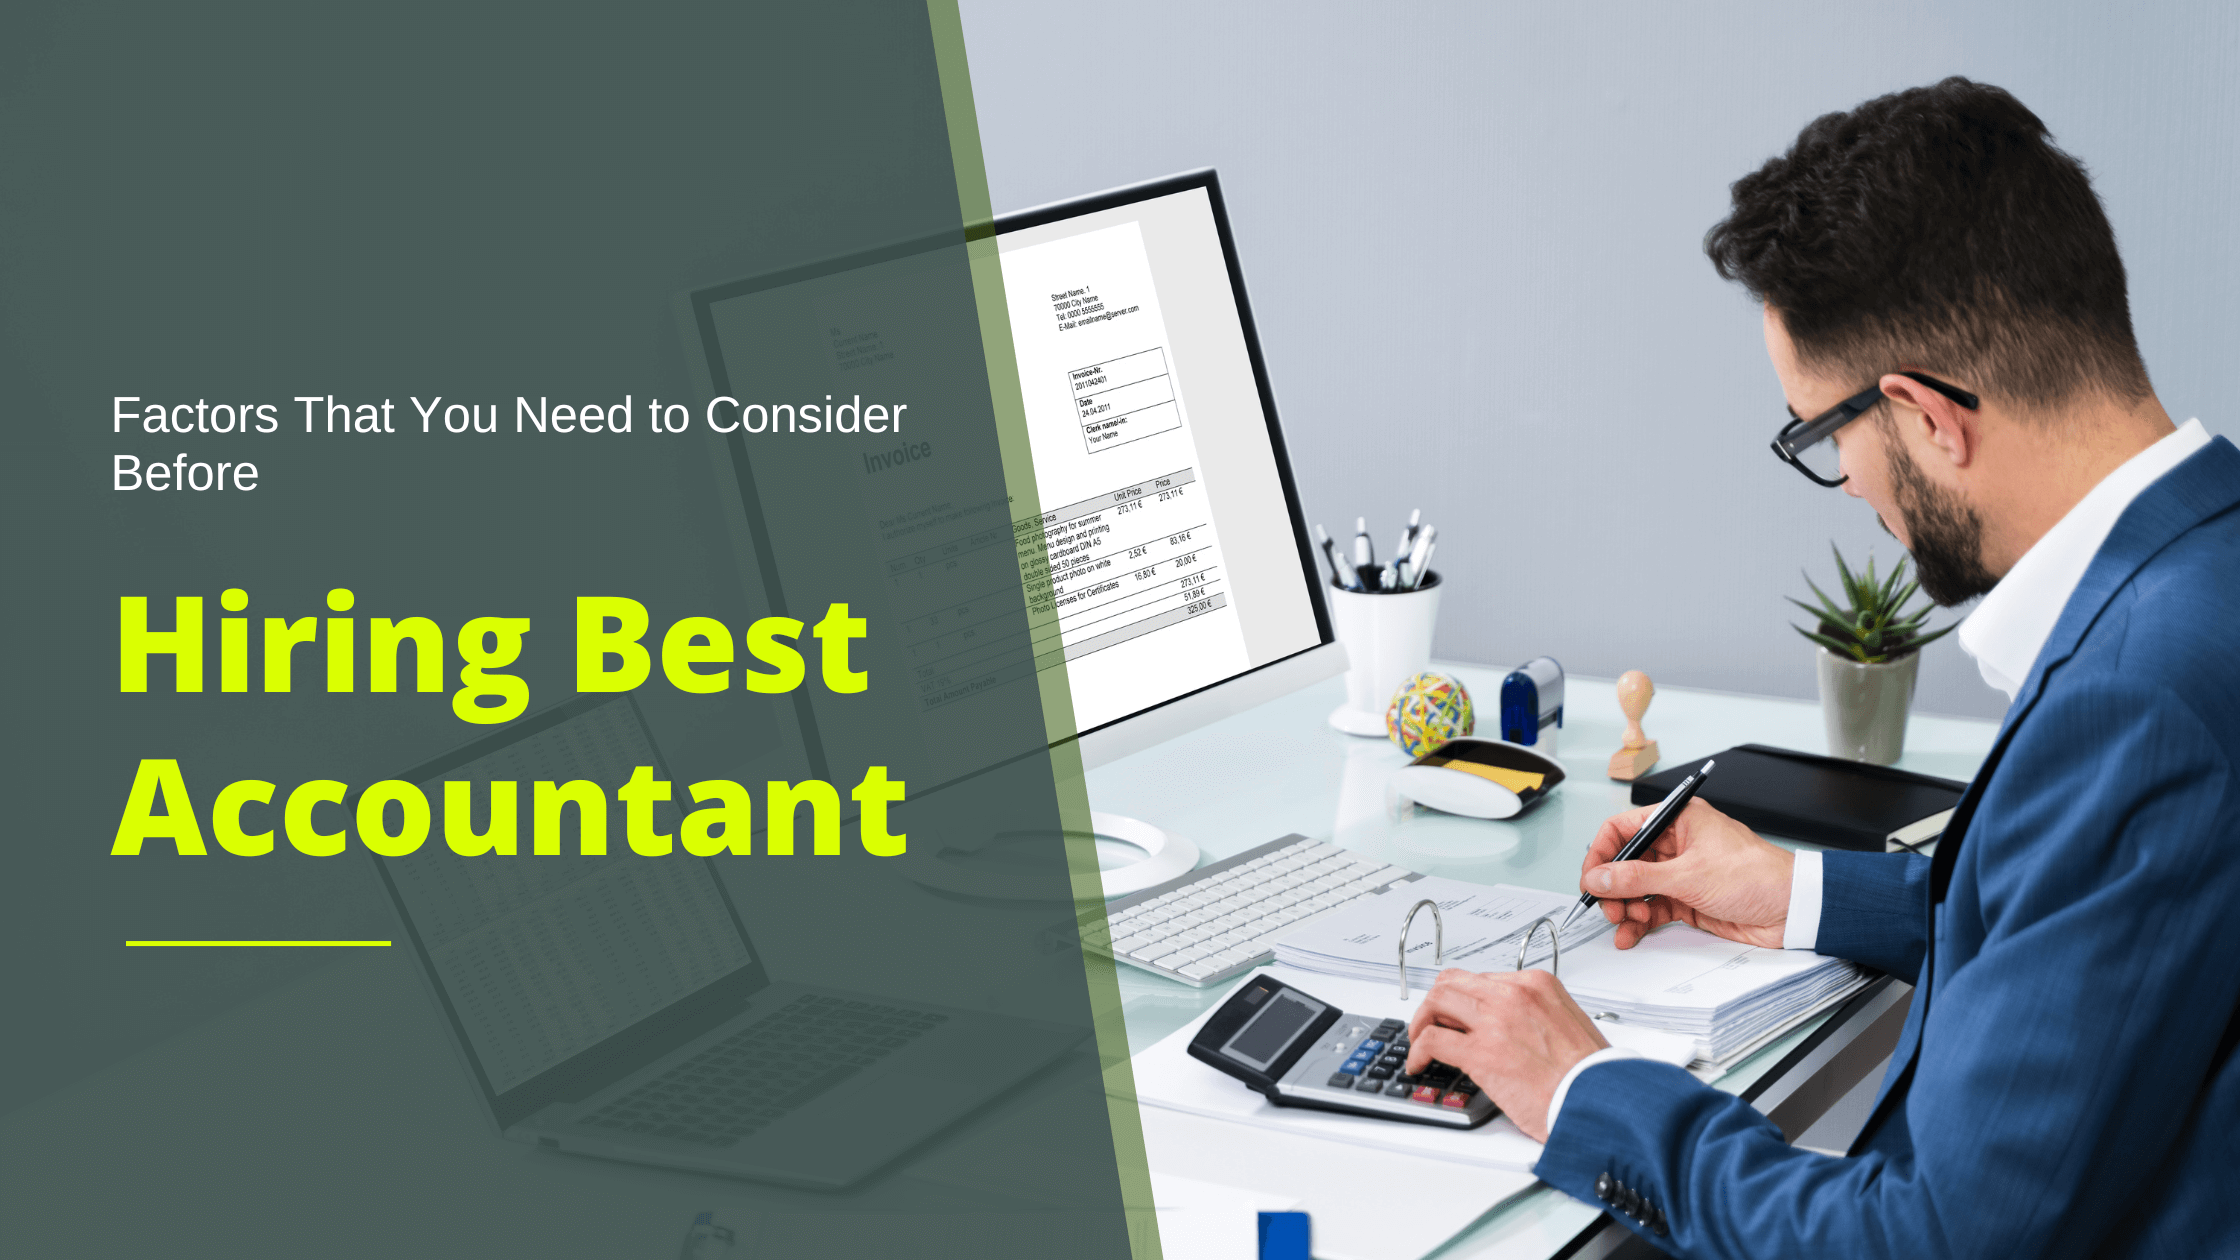 Factors That You Need to Consider Before Hiring Best Accountant